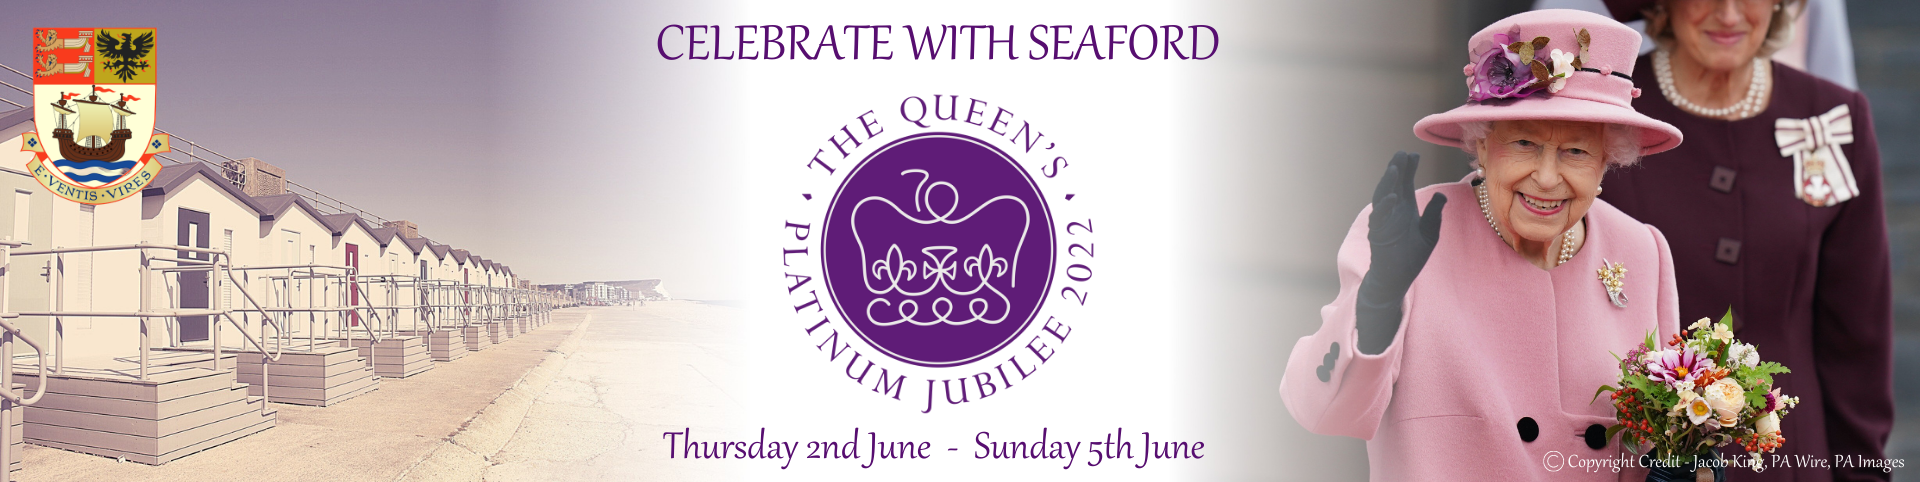 wEB bANNER pROMOTING THE qUEENS pLATIMUN jUBILEE CELEBRATIONS IN sEAFORD